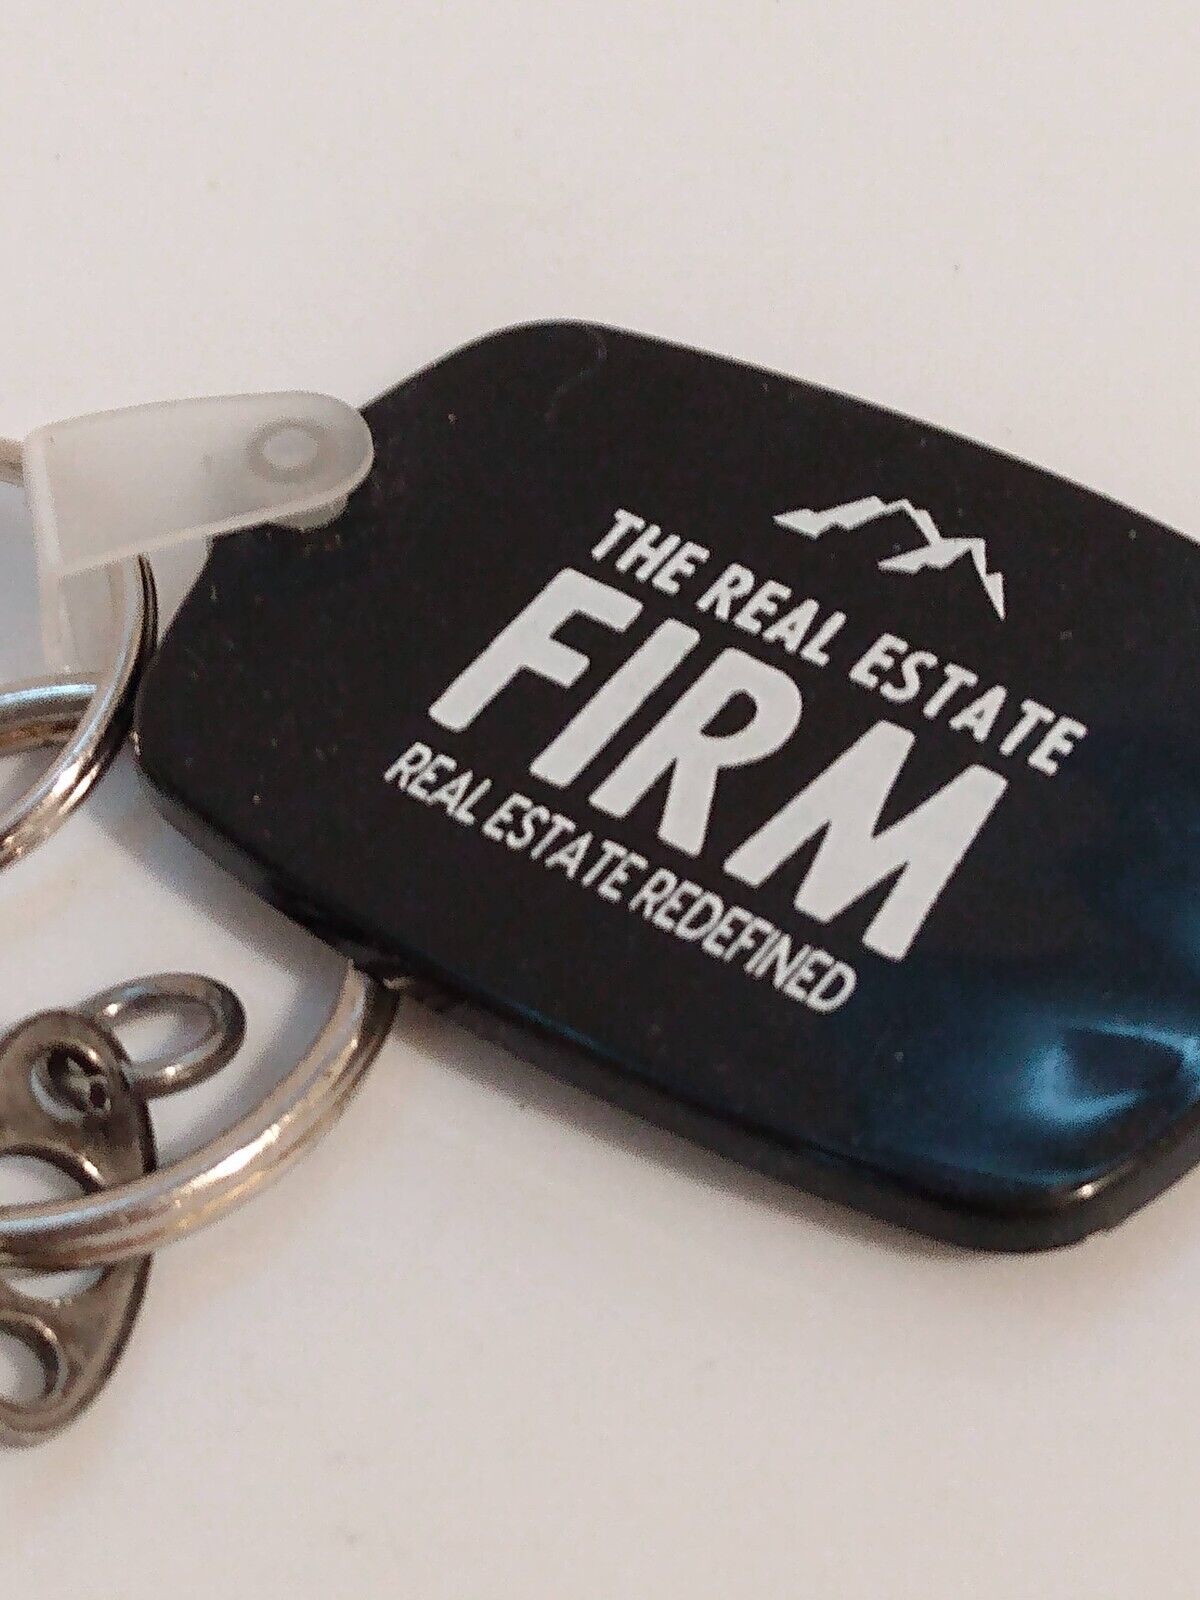 The Real Estate Firm Redefined Promo Keyring